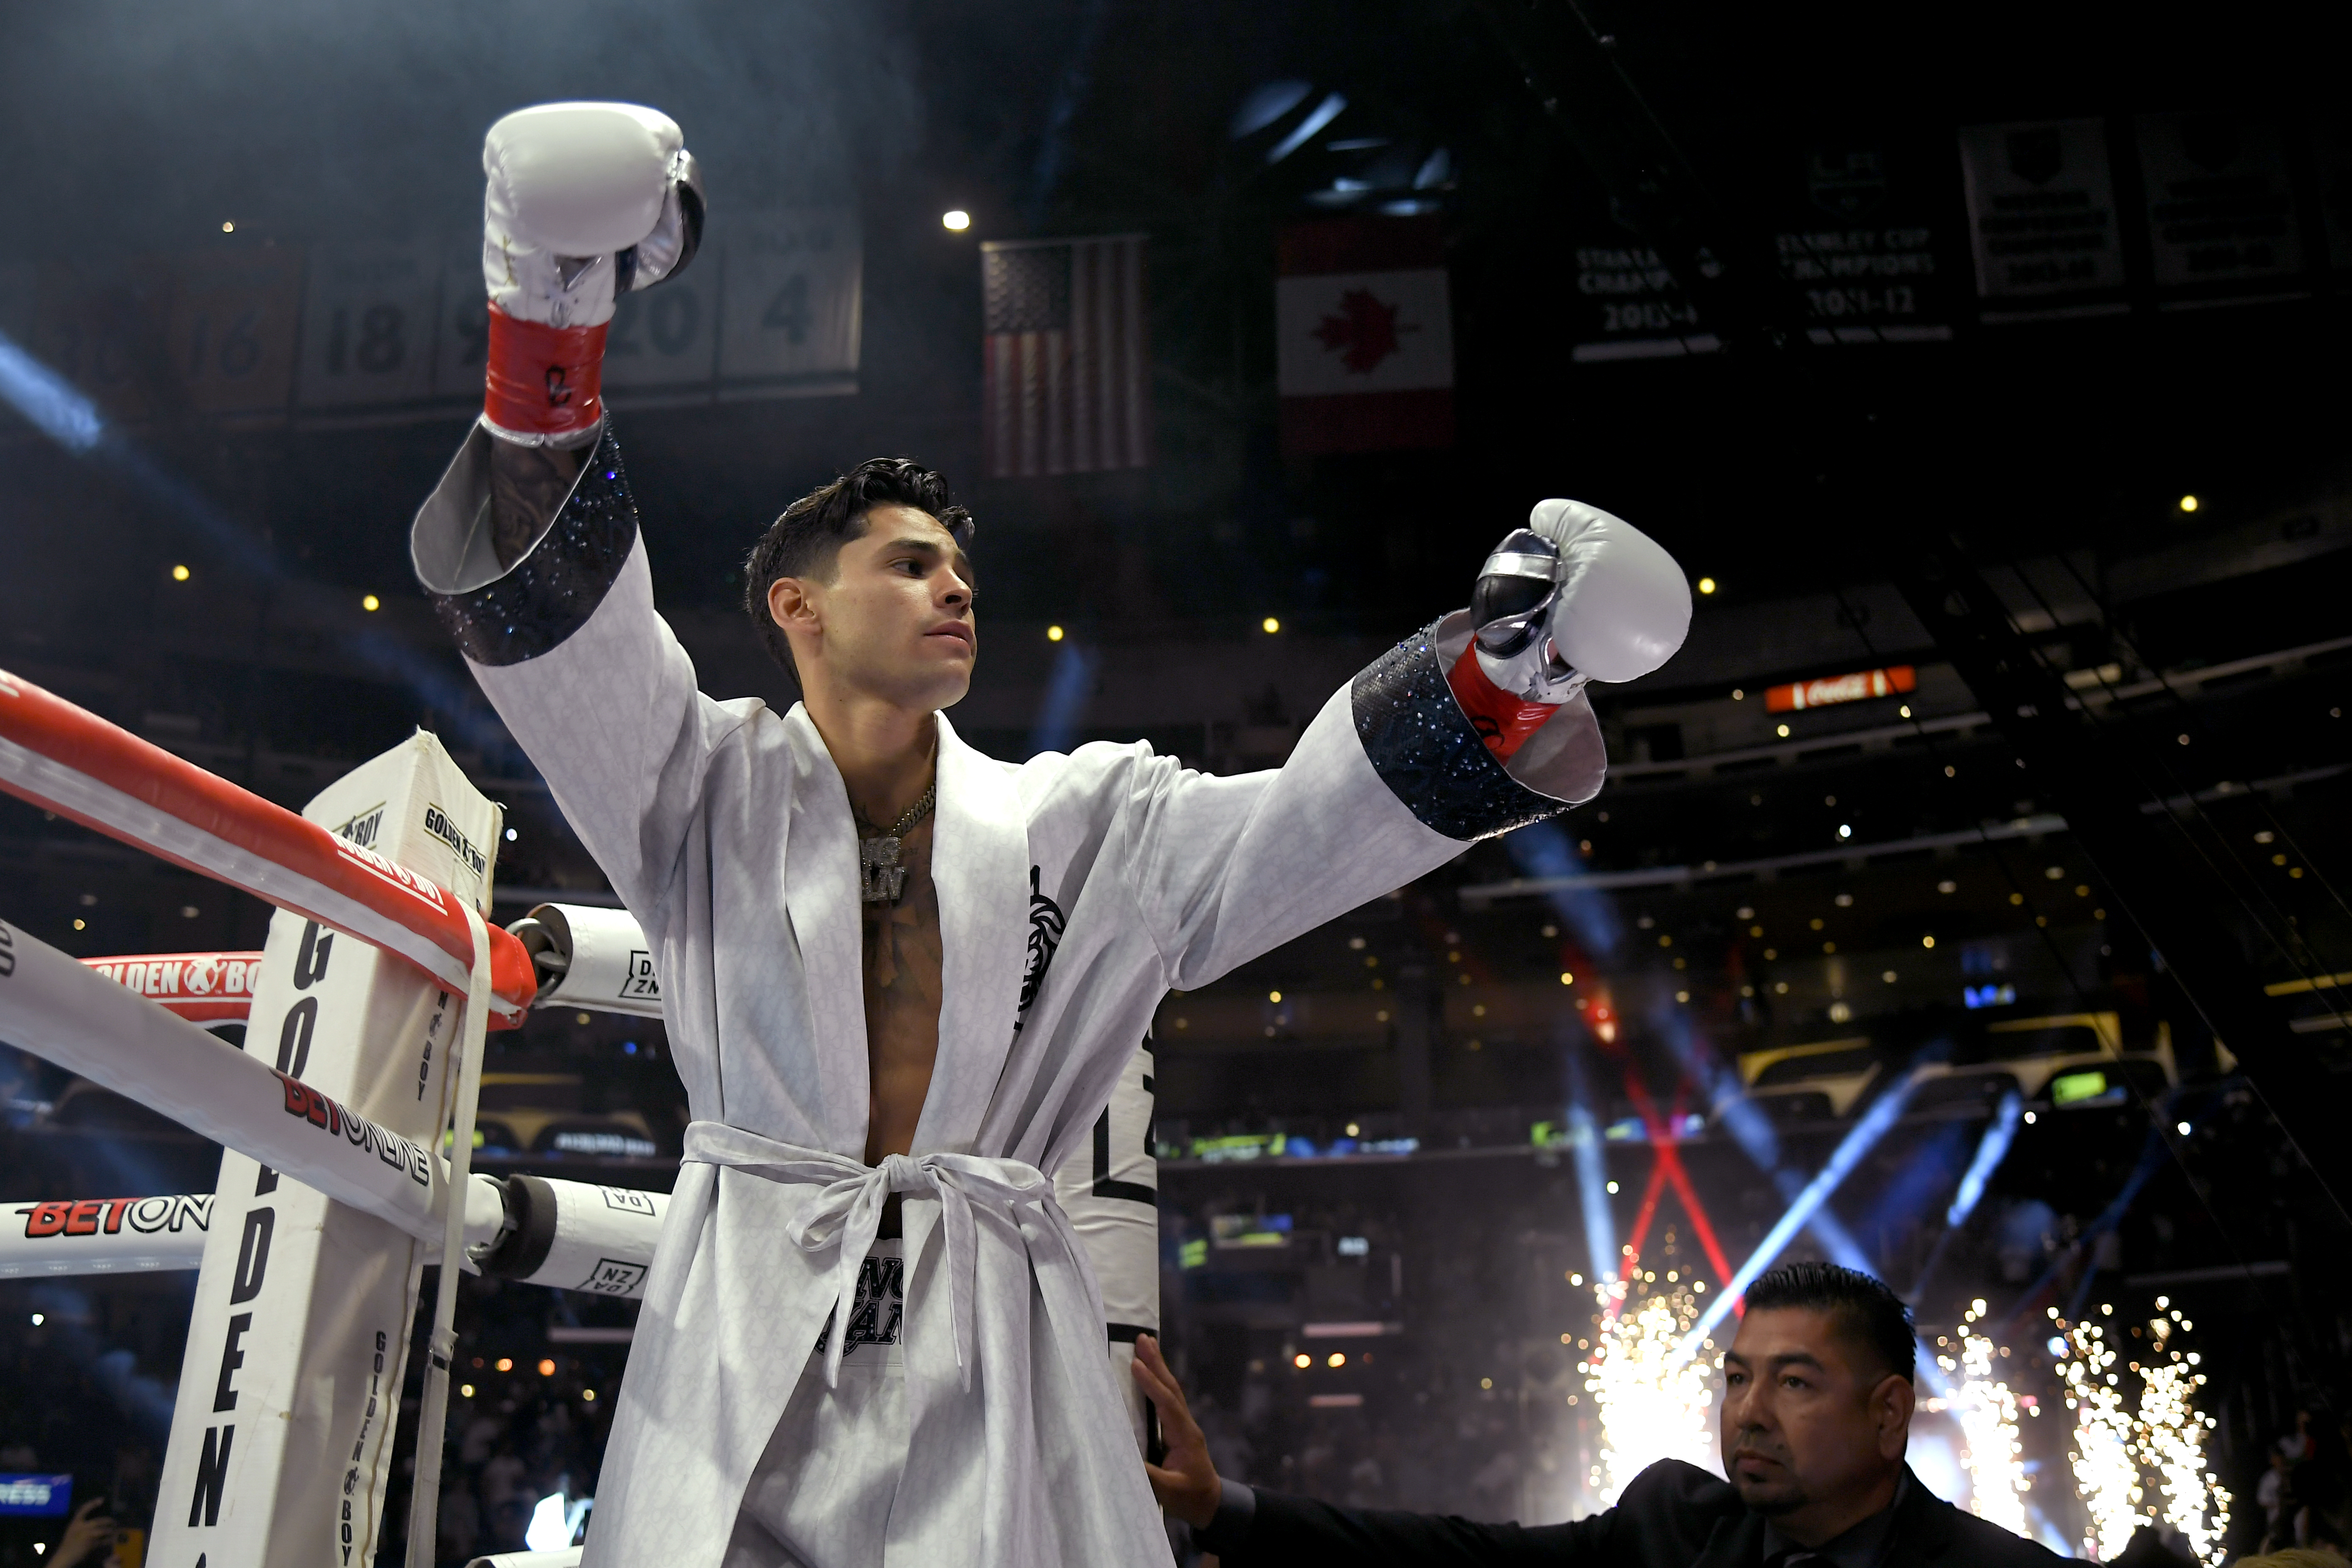 Ryan Garcia has supreme belief in his talent and abilities, and will look to demonstrate that against Gervonta Davis in early 2023.